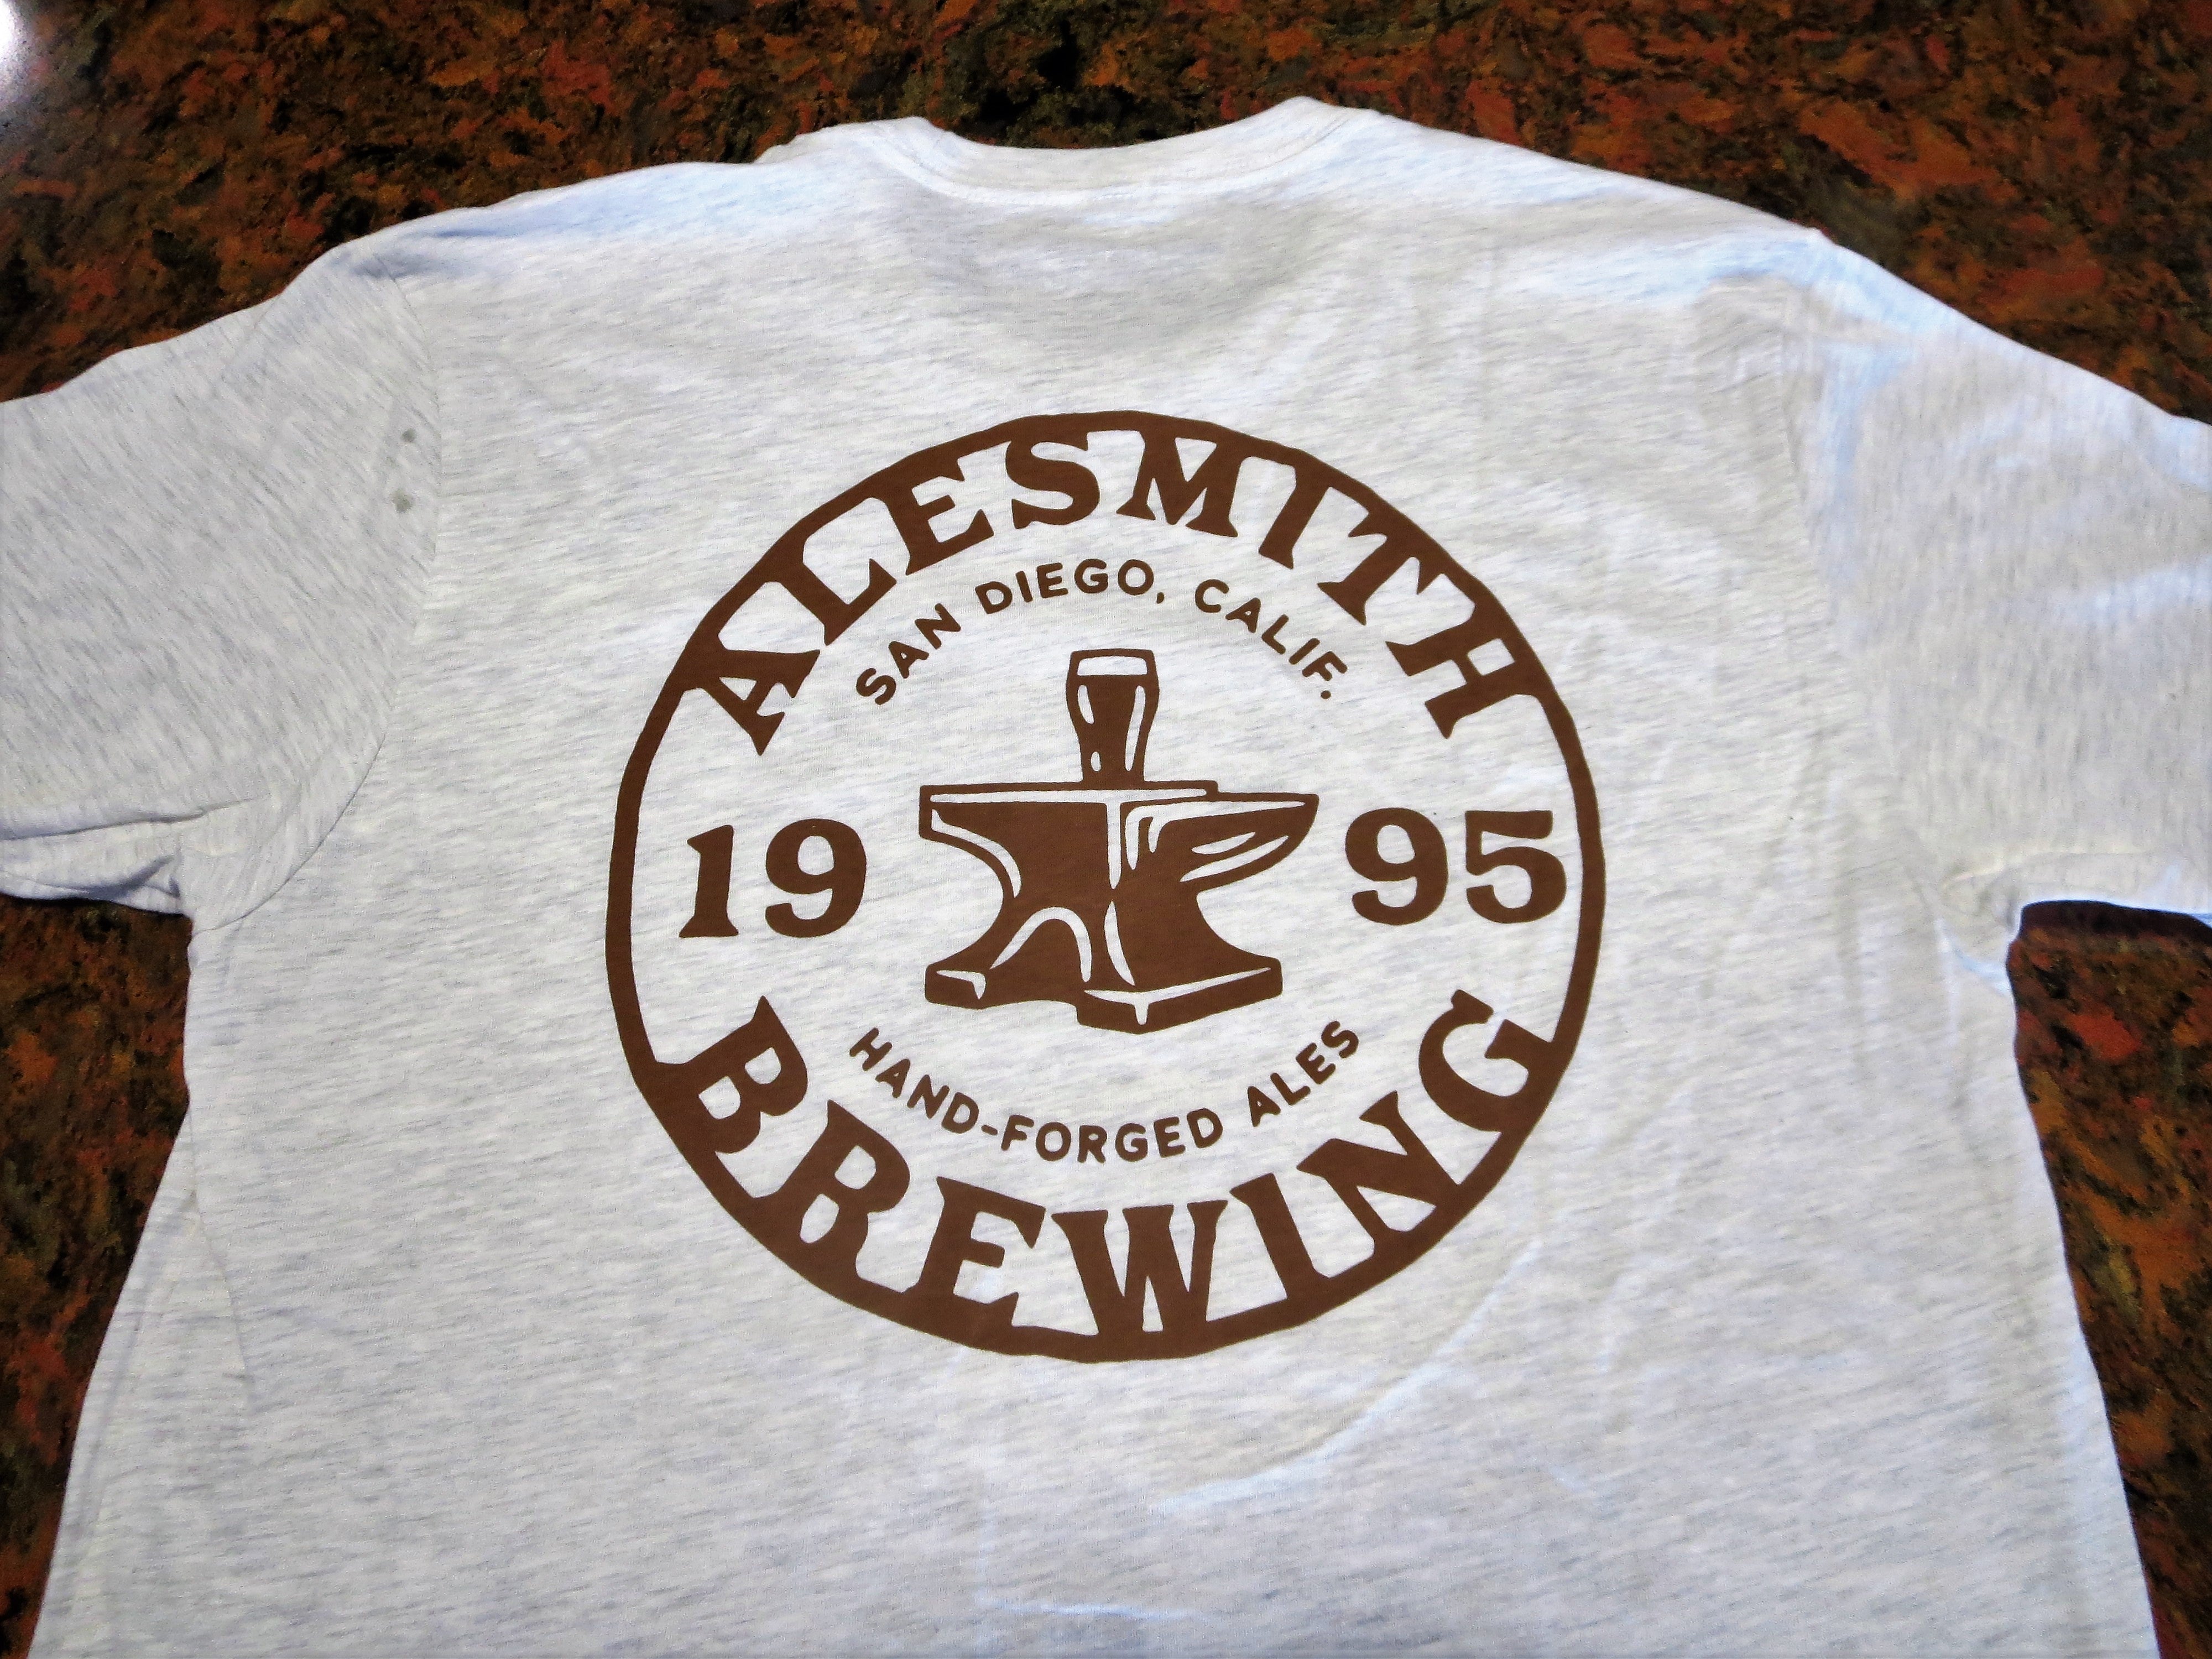 1995 Stamp Tee - Oatmeal - AleSmith Brewing Co.